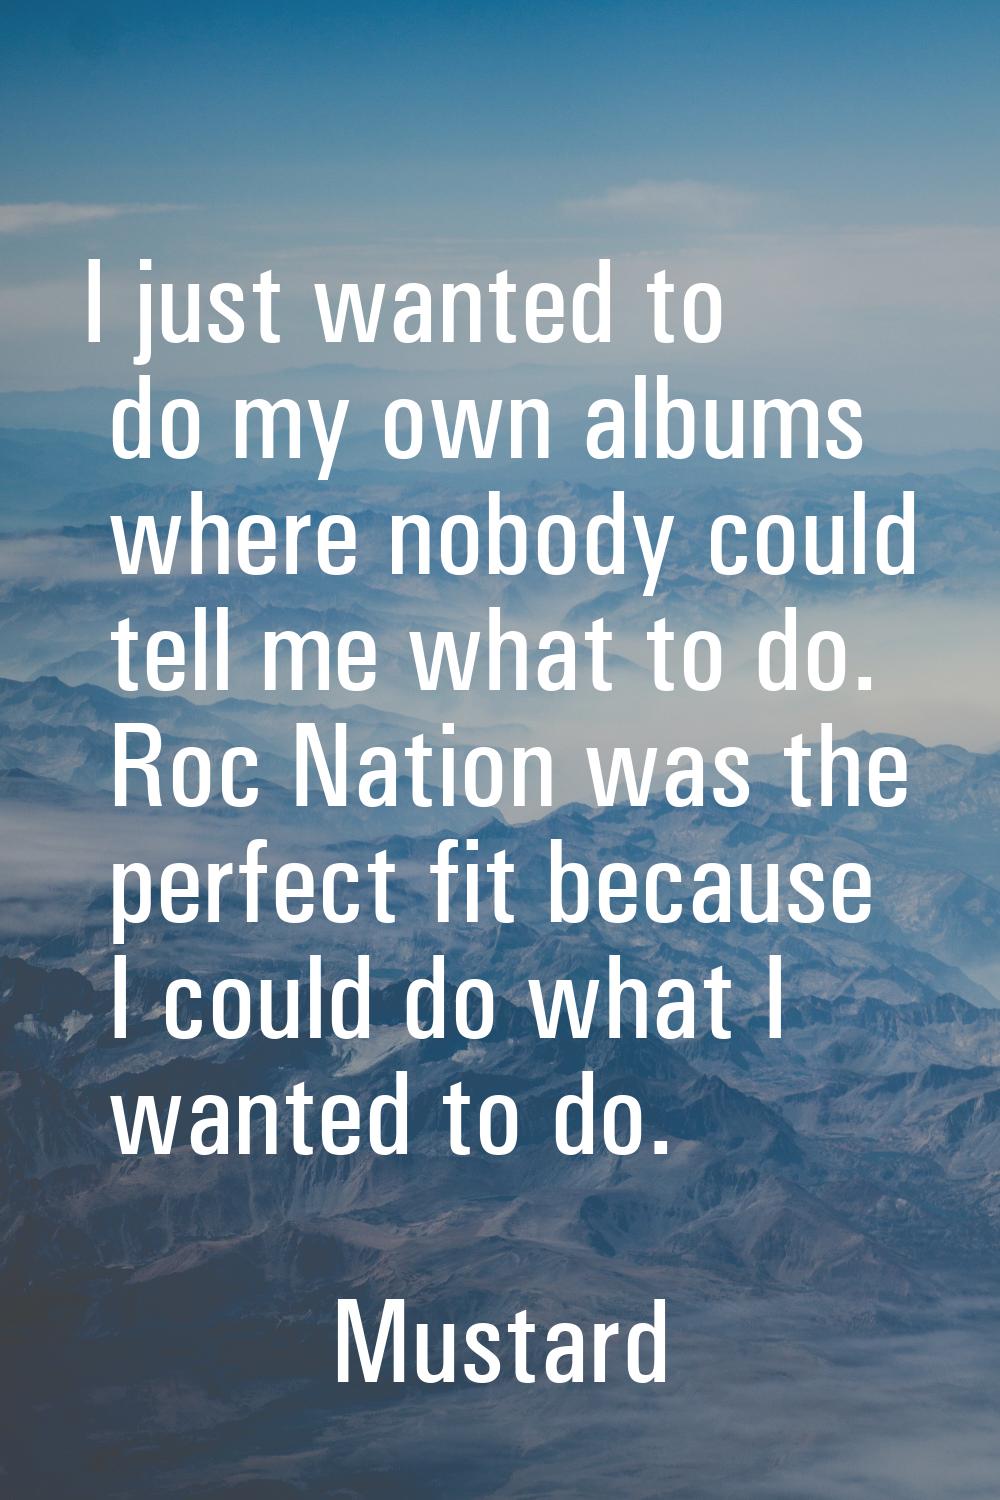 I just wanted to do my own albums where nobody could tell me what to do. Roc Nation was the perfect